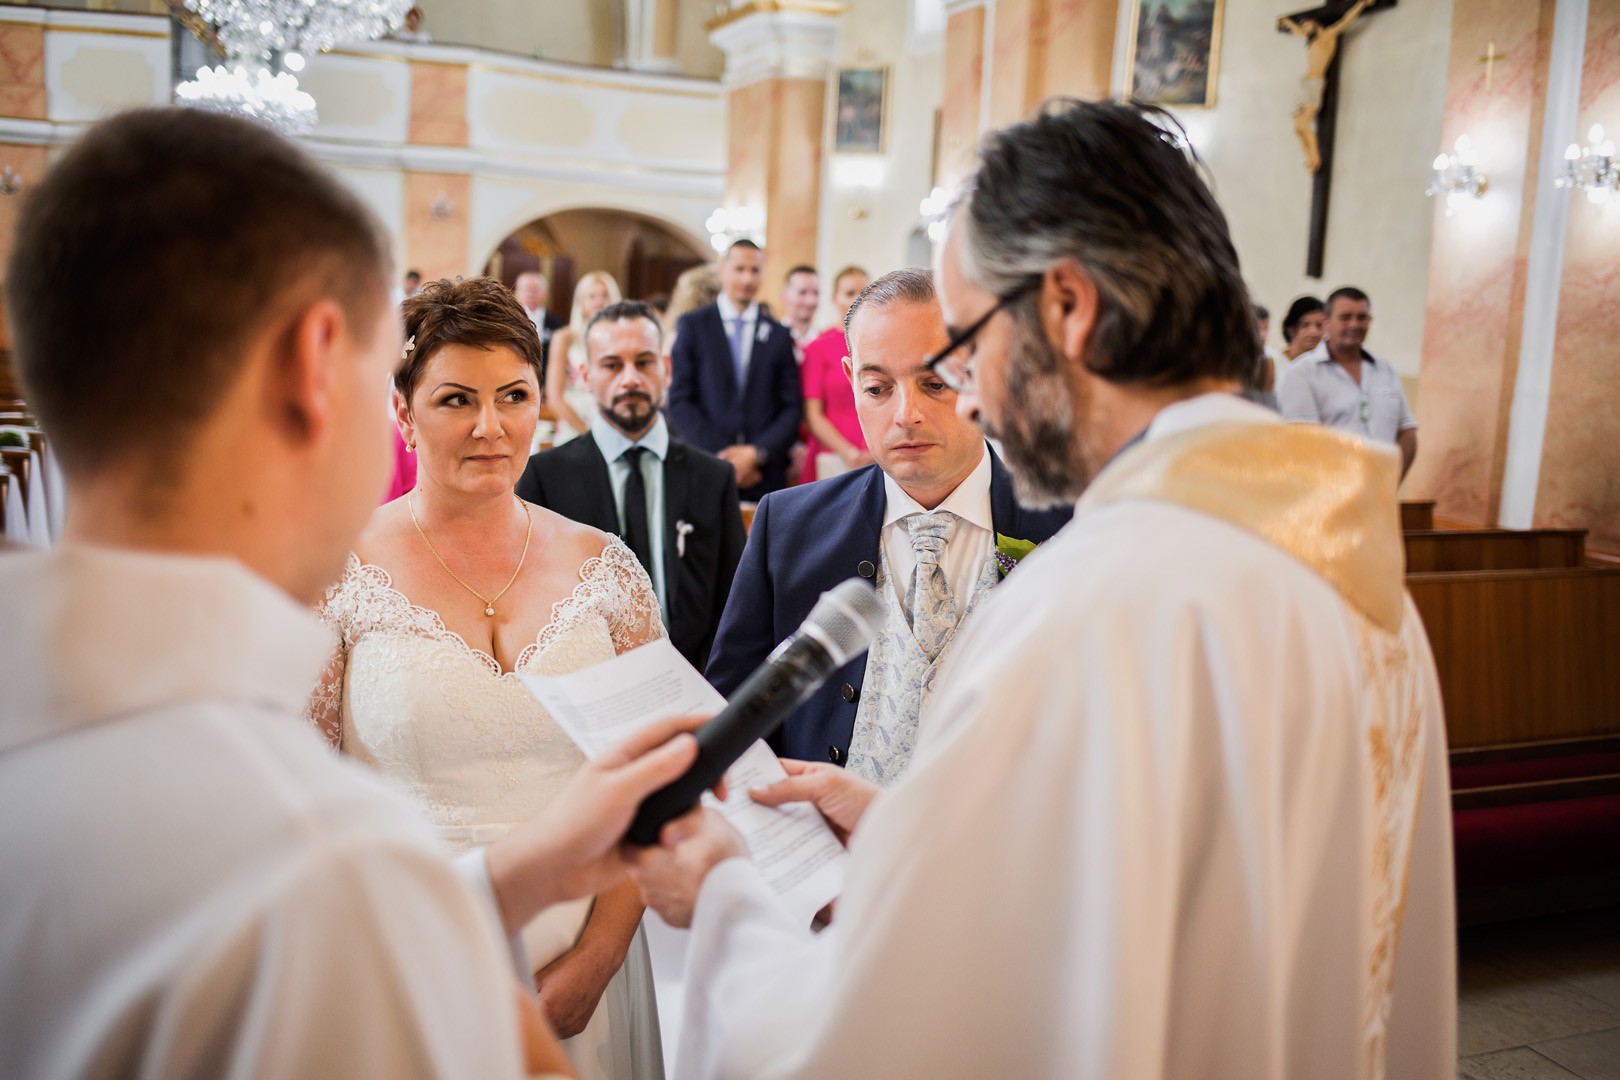 Wedding photos from the Slovak-Italian wedding of Mirka and Baldy in the beautiful surroundings of the Gbeľany Manor House - 0069.jpg